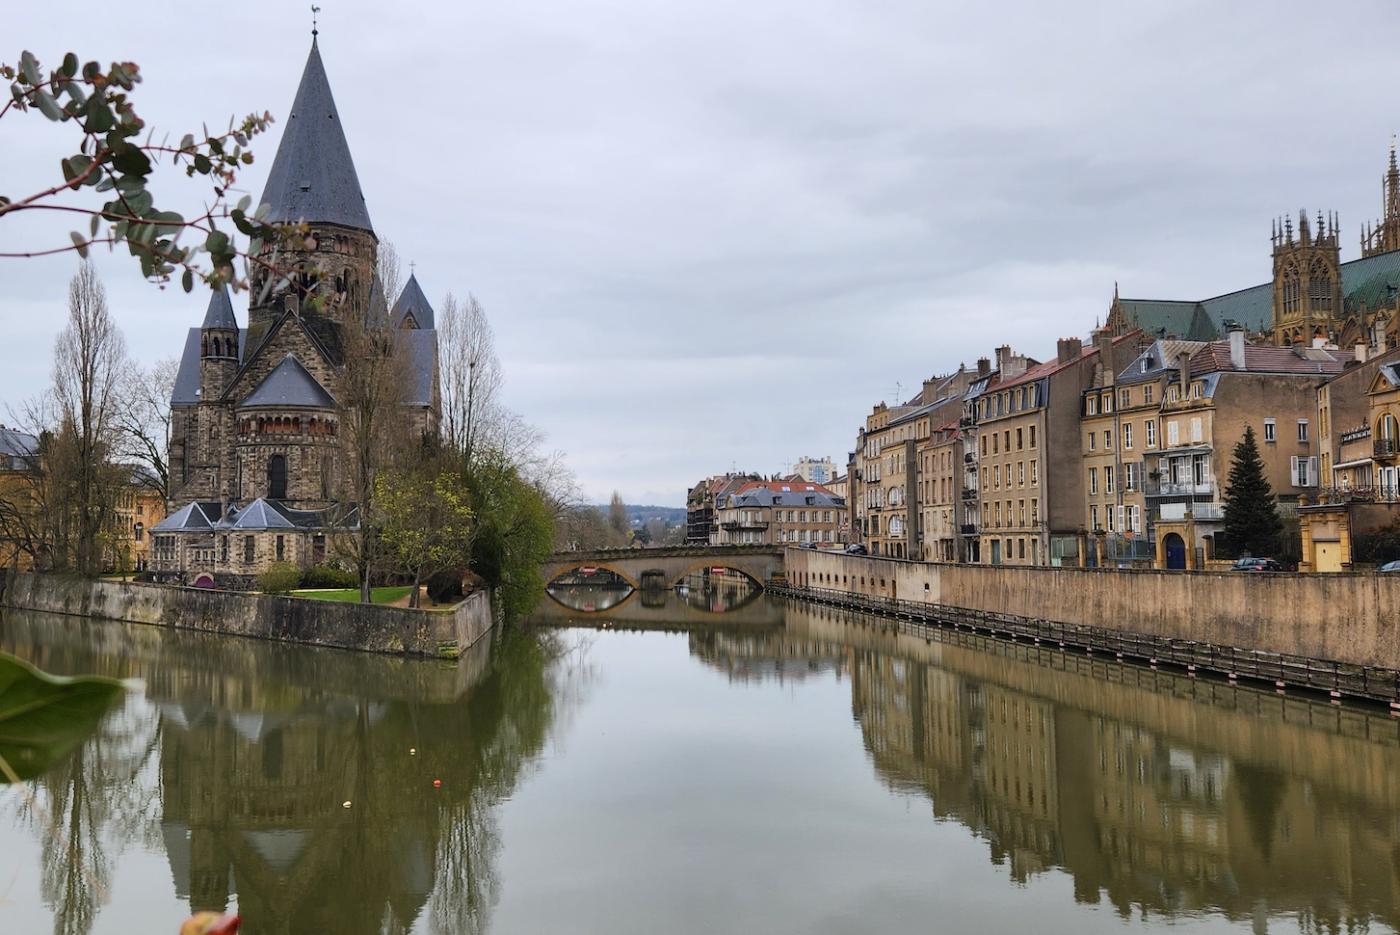 How a Google Search Led Me to an Unexpected Region of France